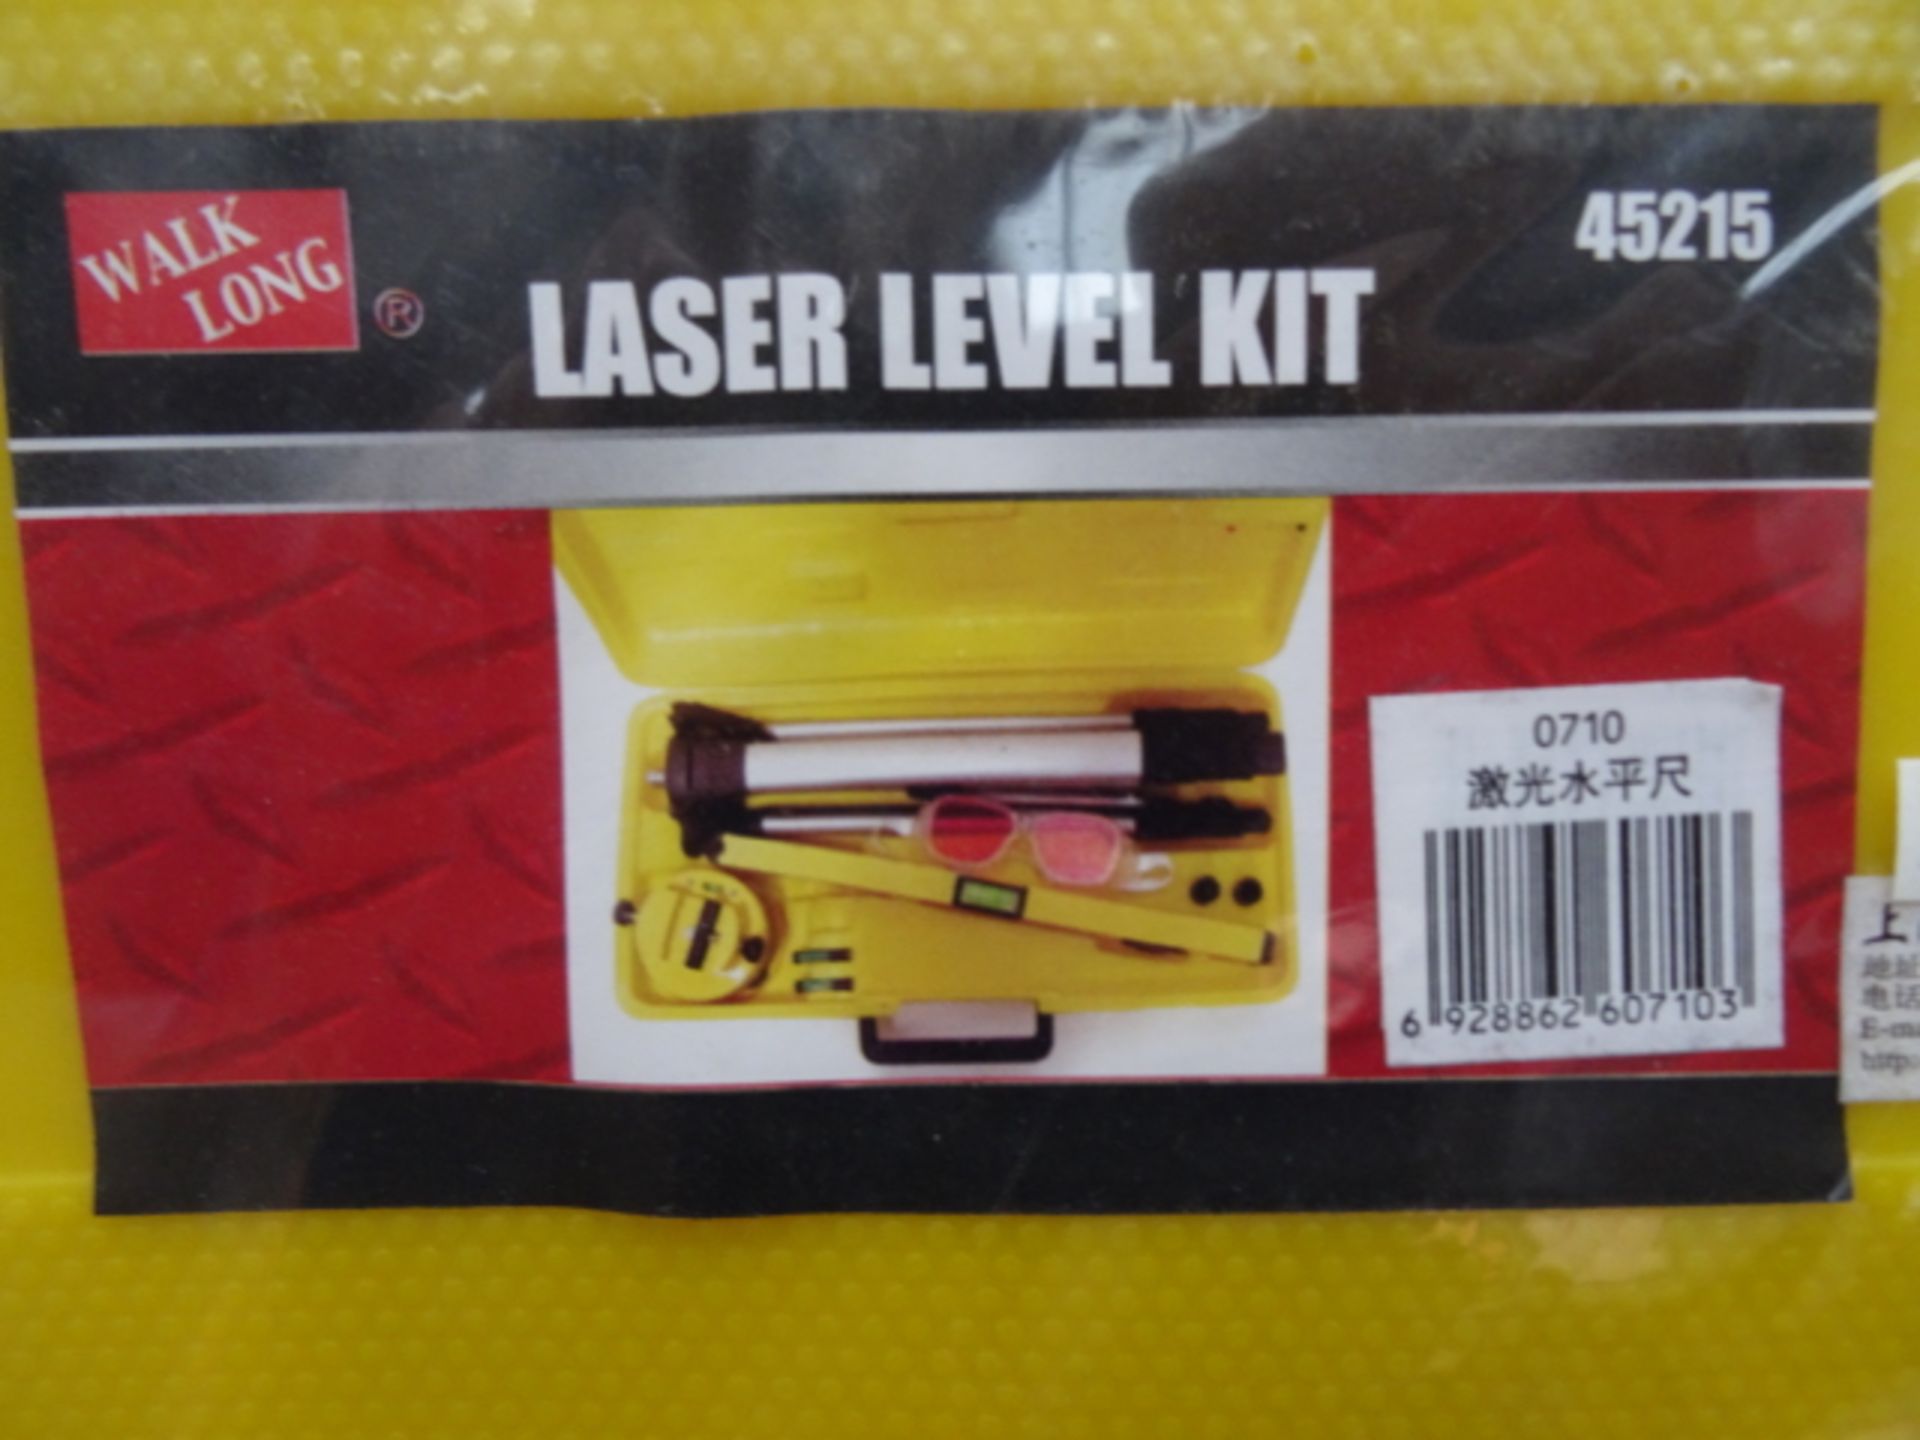 4 x Laser Level Kits. Very high quality. RRP £49 Each. Total RRP £196! Brand new and Packaged stock! - Image 2 of 4